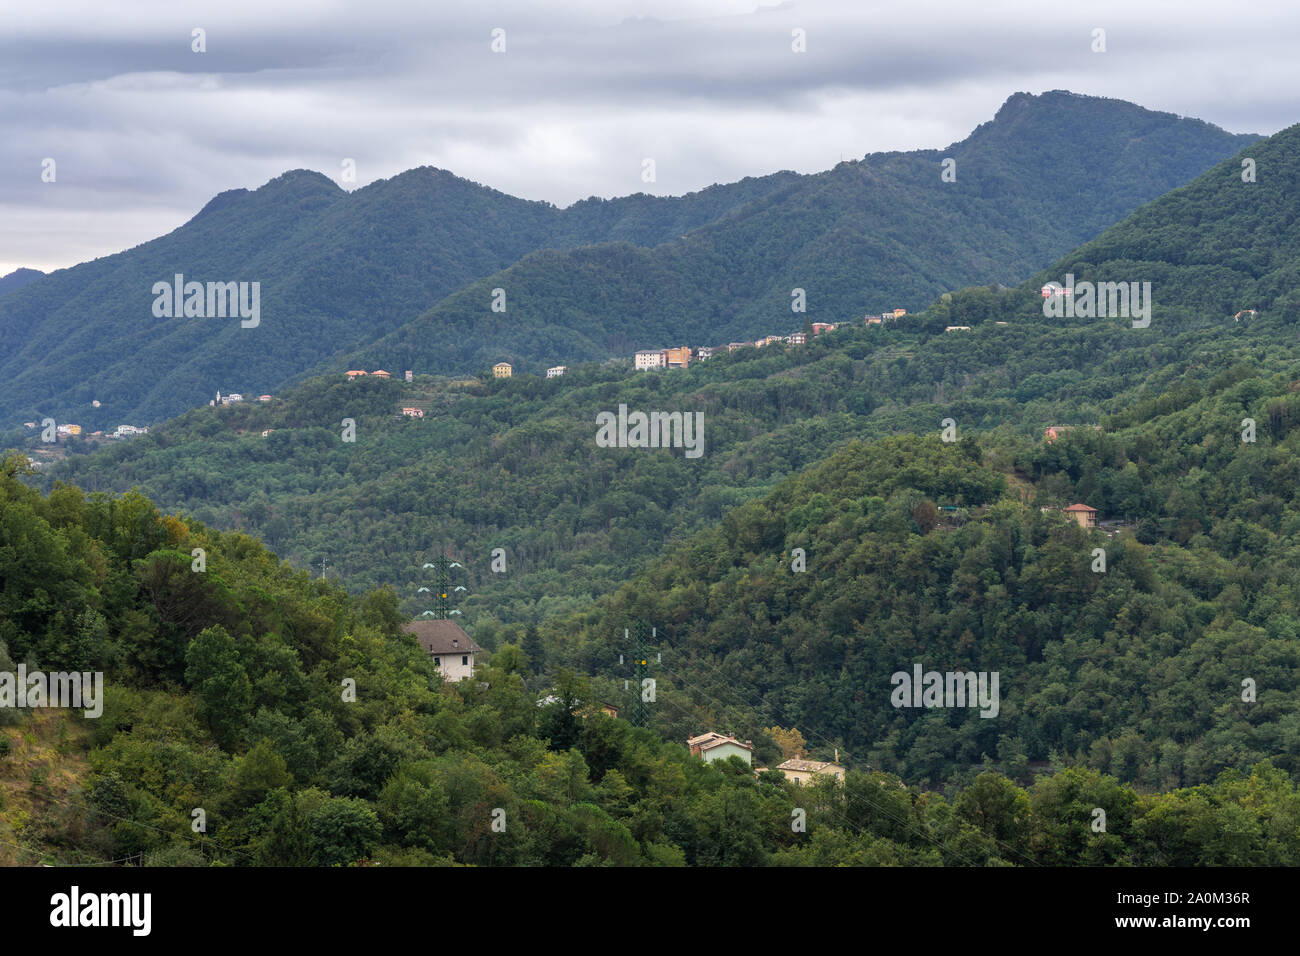 Landscape of the Apennines with green dense forest and villages in Liguria, Italy Stock Photo